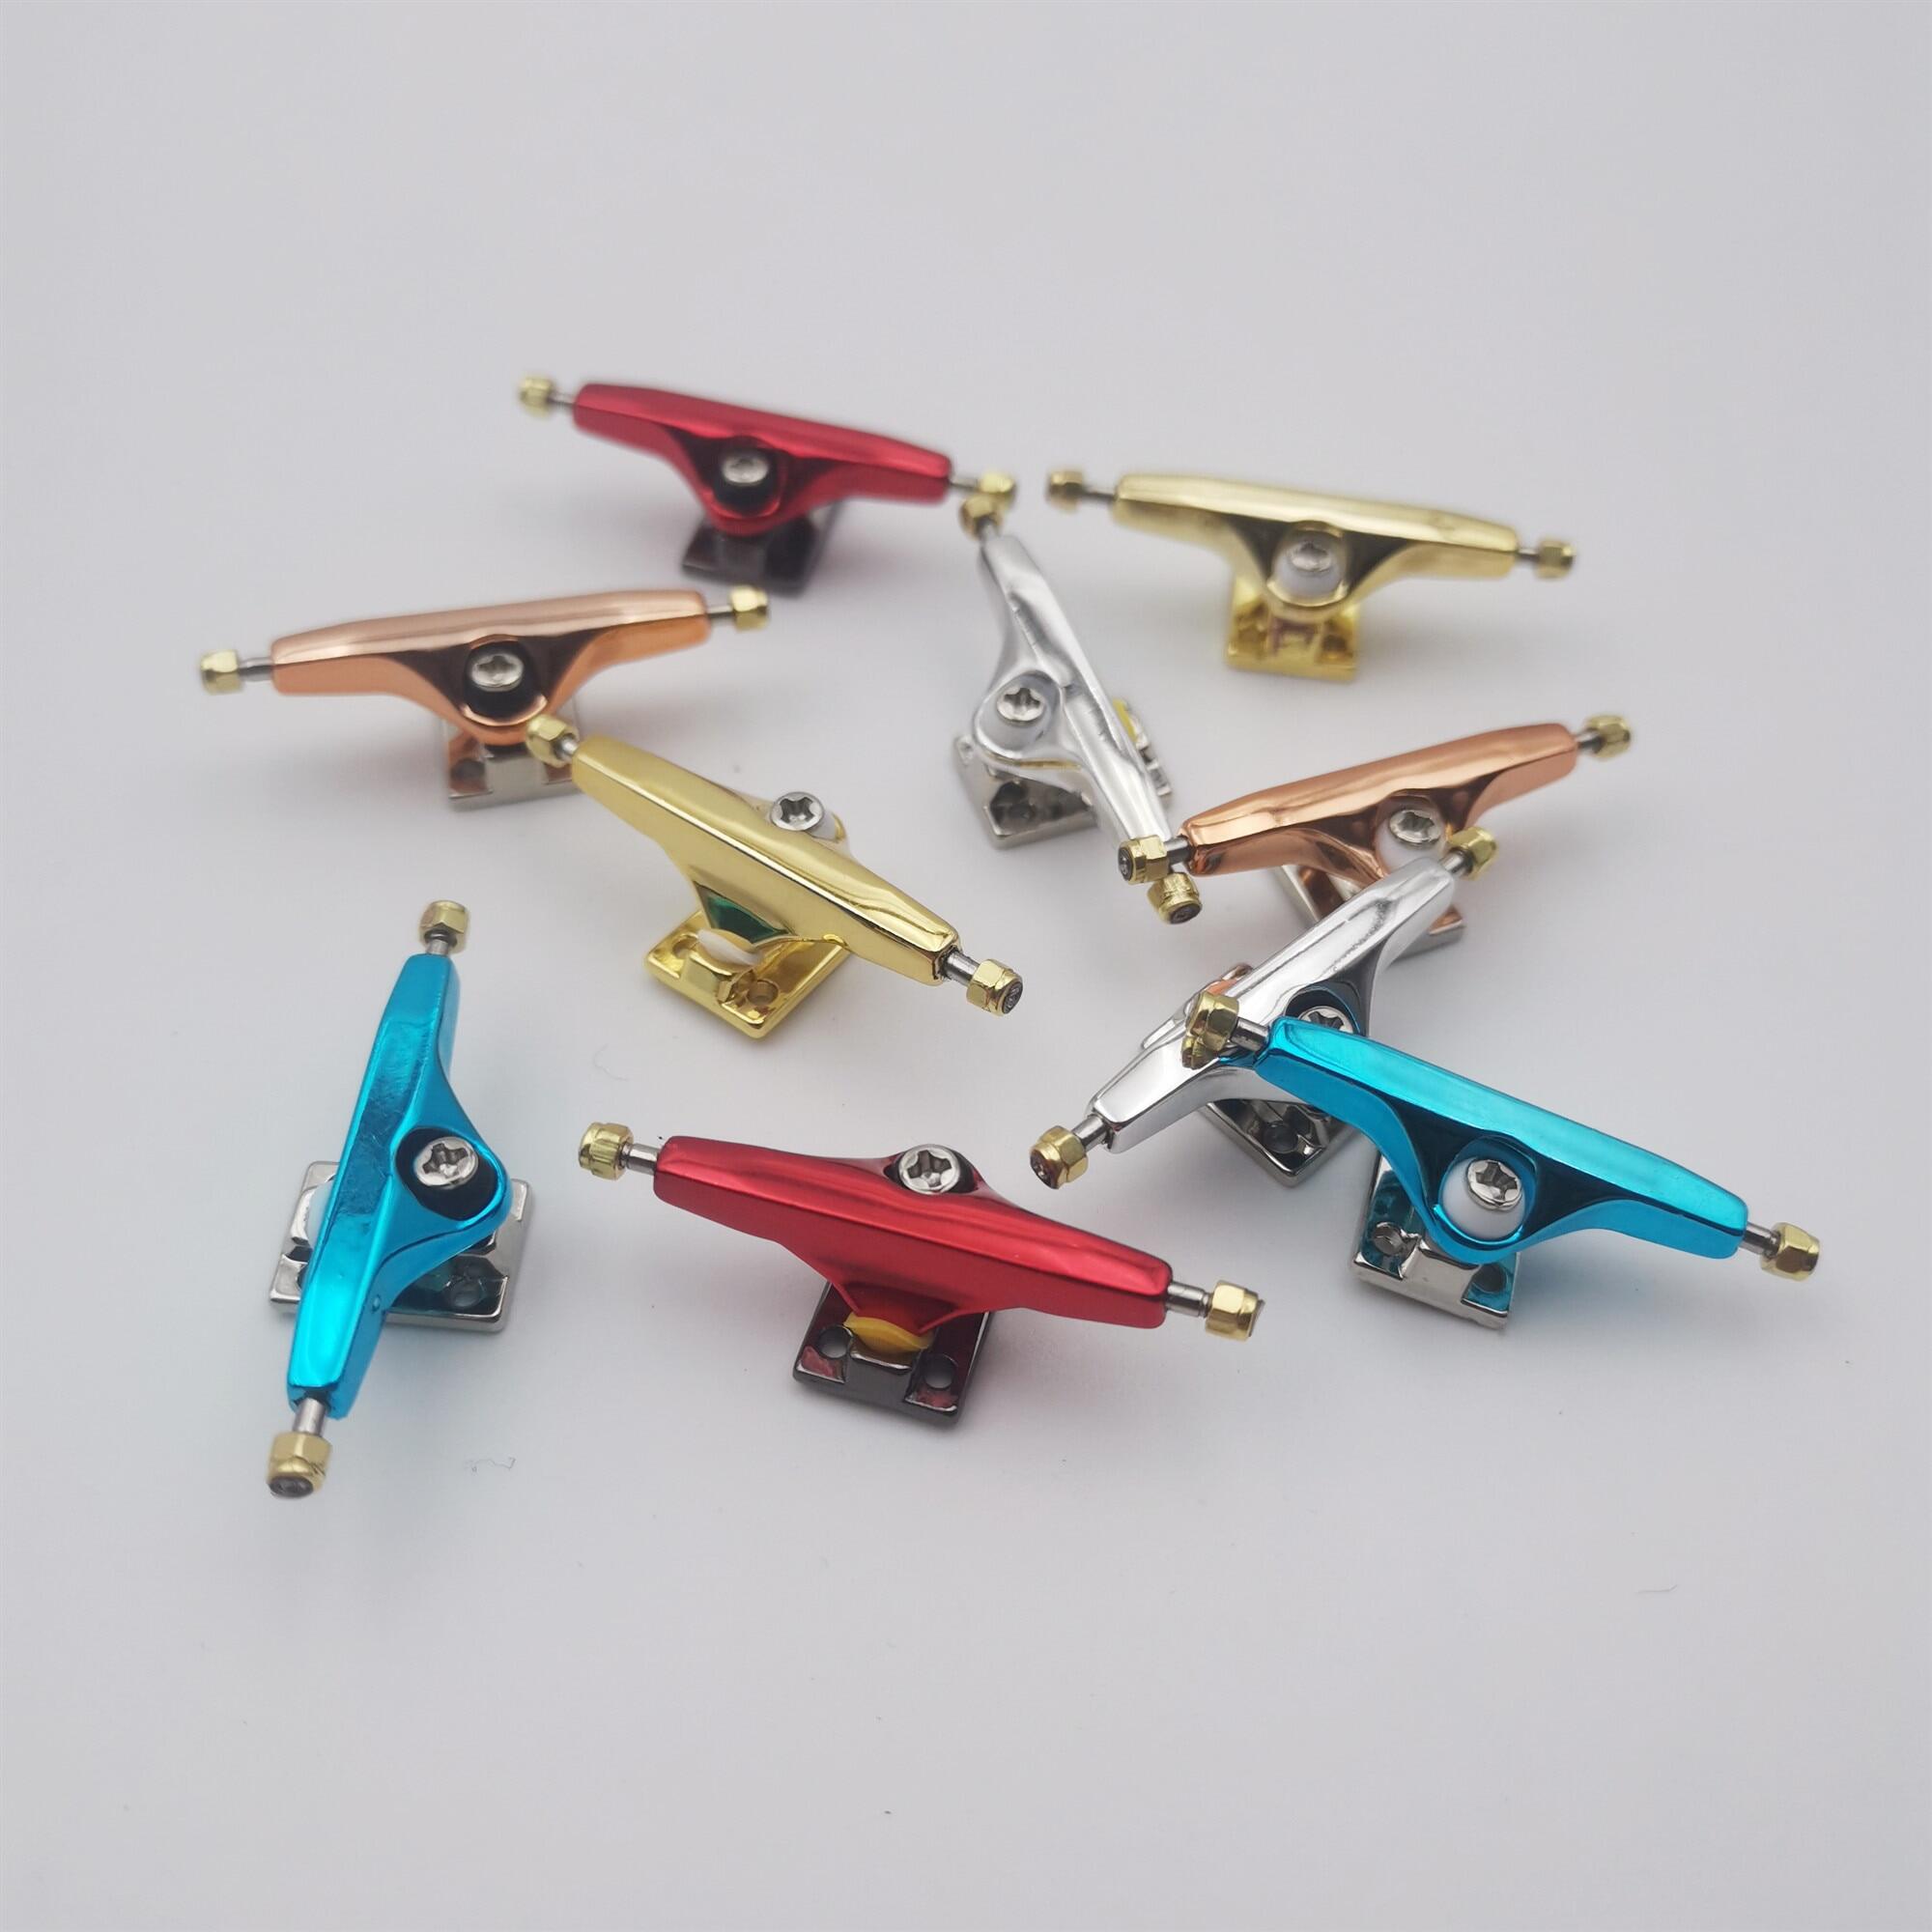 New Fingerboard Truck 34Mm For Professional Finger Skateboard With Soft